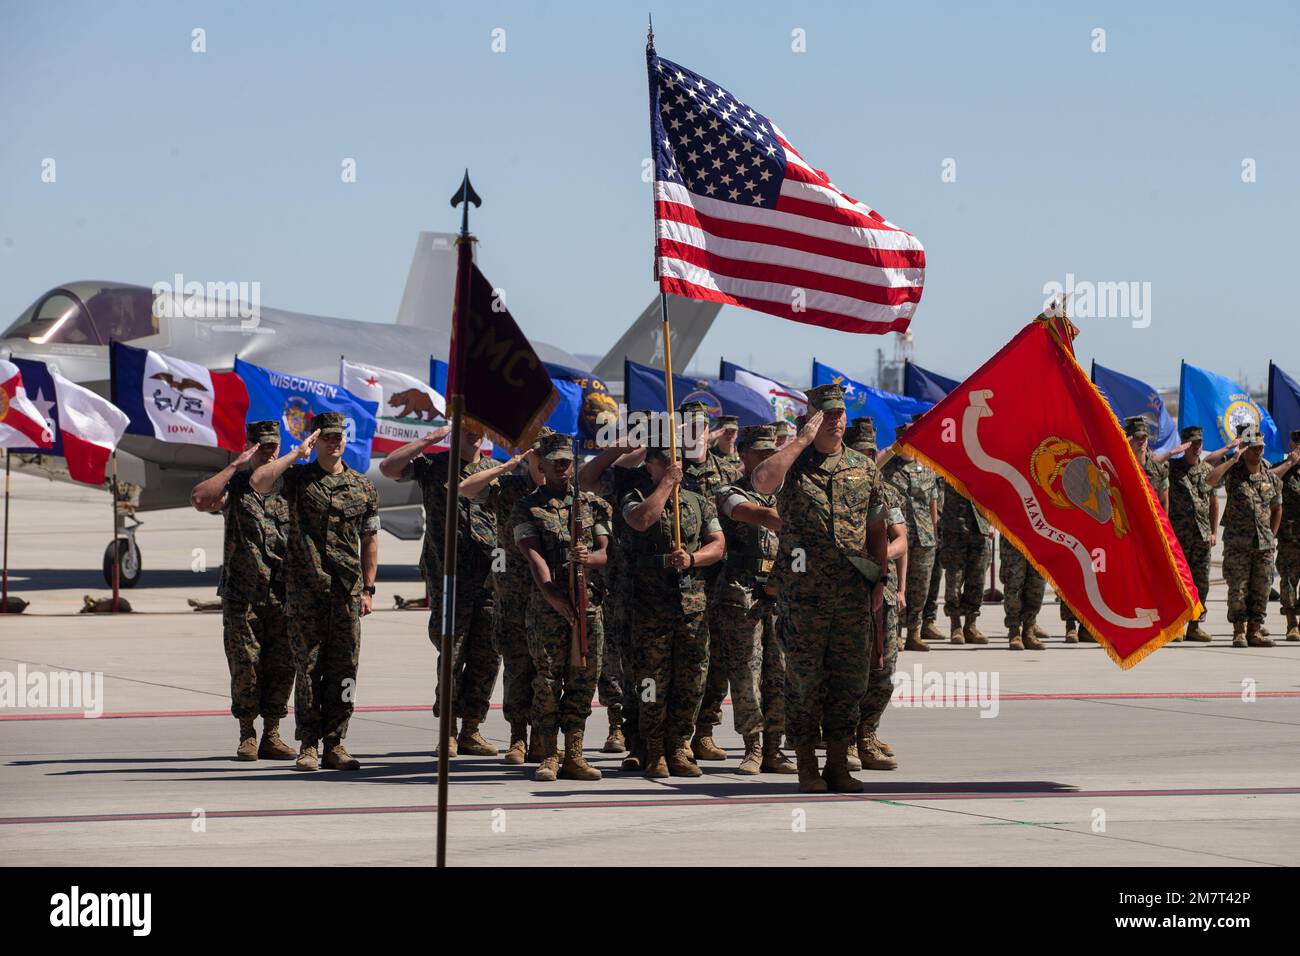 U.S. Marines assigned to Marine Aviation Weapons and Tactics Squadron One (MAWTS-1) and the incoming commanding officer, Col. Eric D. Purcell, salute the outgoing commanding officer of MAWTS-1, Col. Steve E. Gillette, during the Change of Command Ceremony at Marine Corps Air Station Yuma, Arizona on May 12, 2022. The MAWTS-1 Change of Command Ceremony marked the official passing of authority from the outgoing commanding officer, Col. Steve E. Gillette, to the incoming commanding officer, Col. Eric D. Purcell. Stock Photo